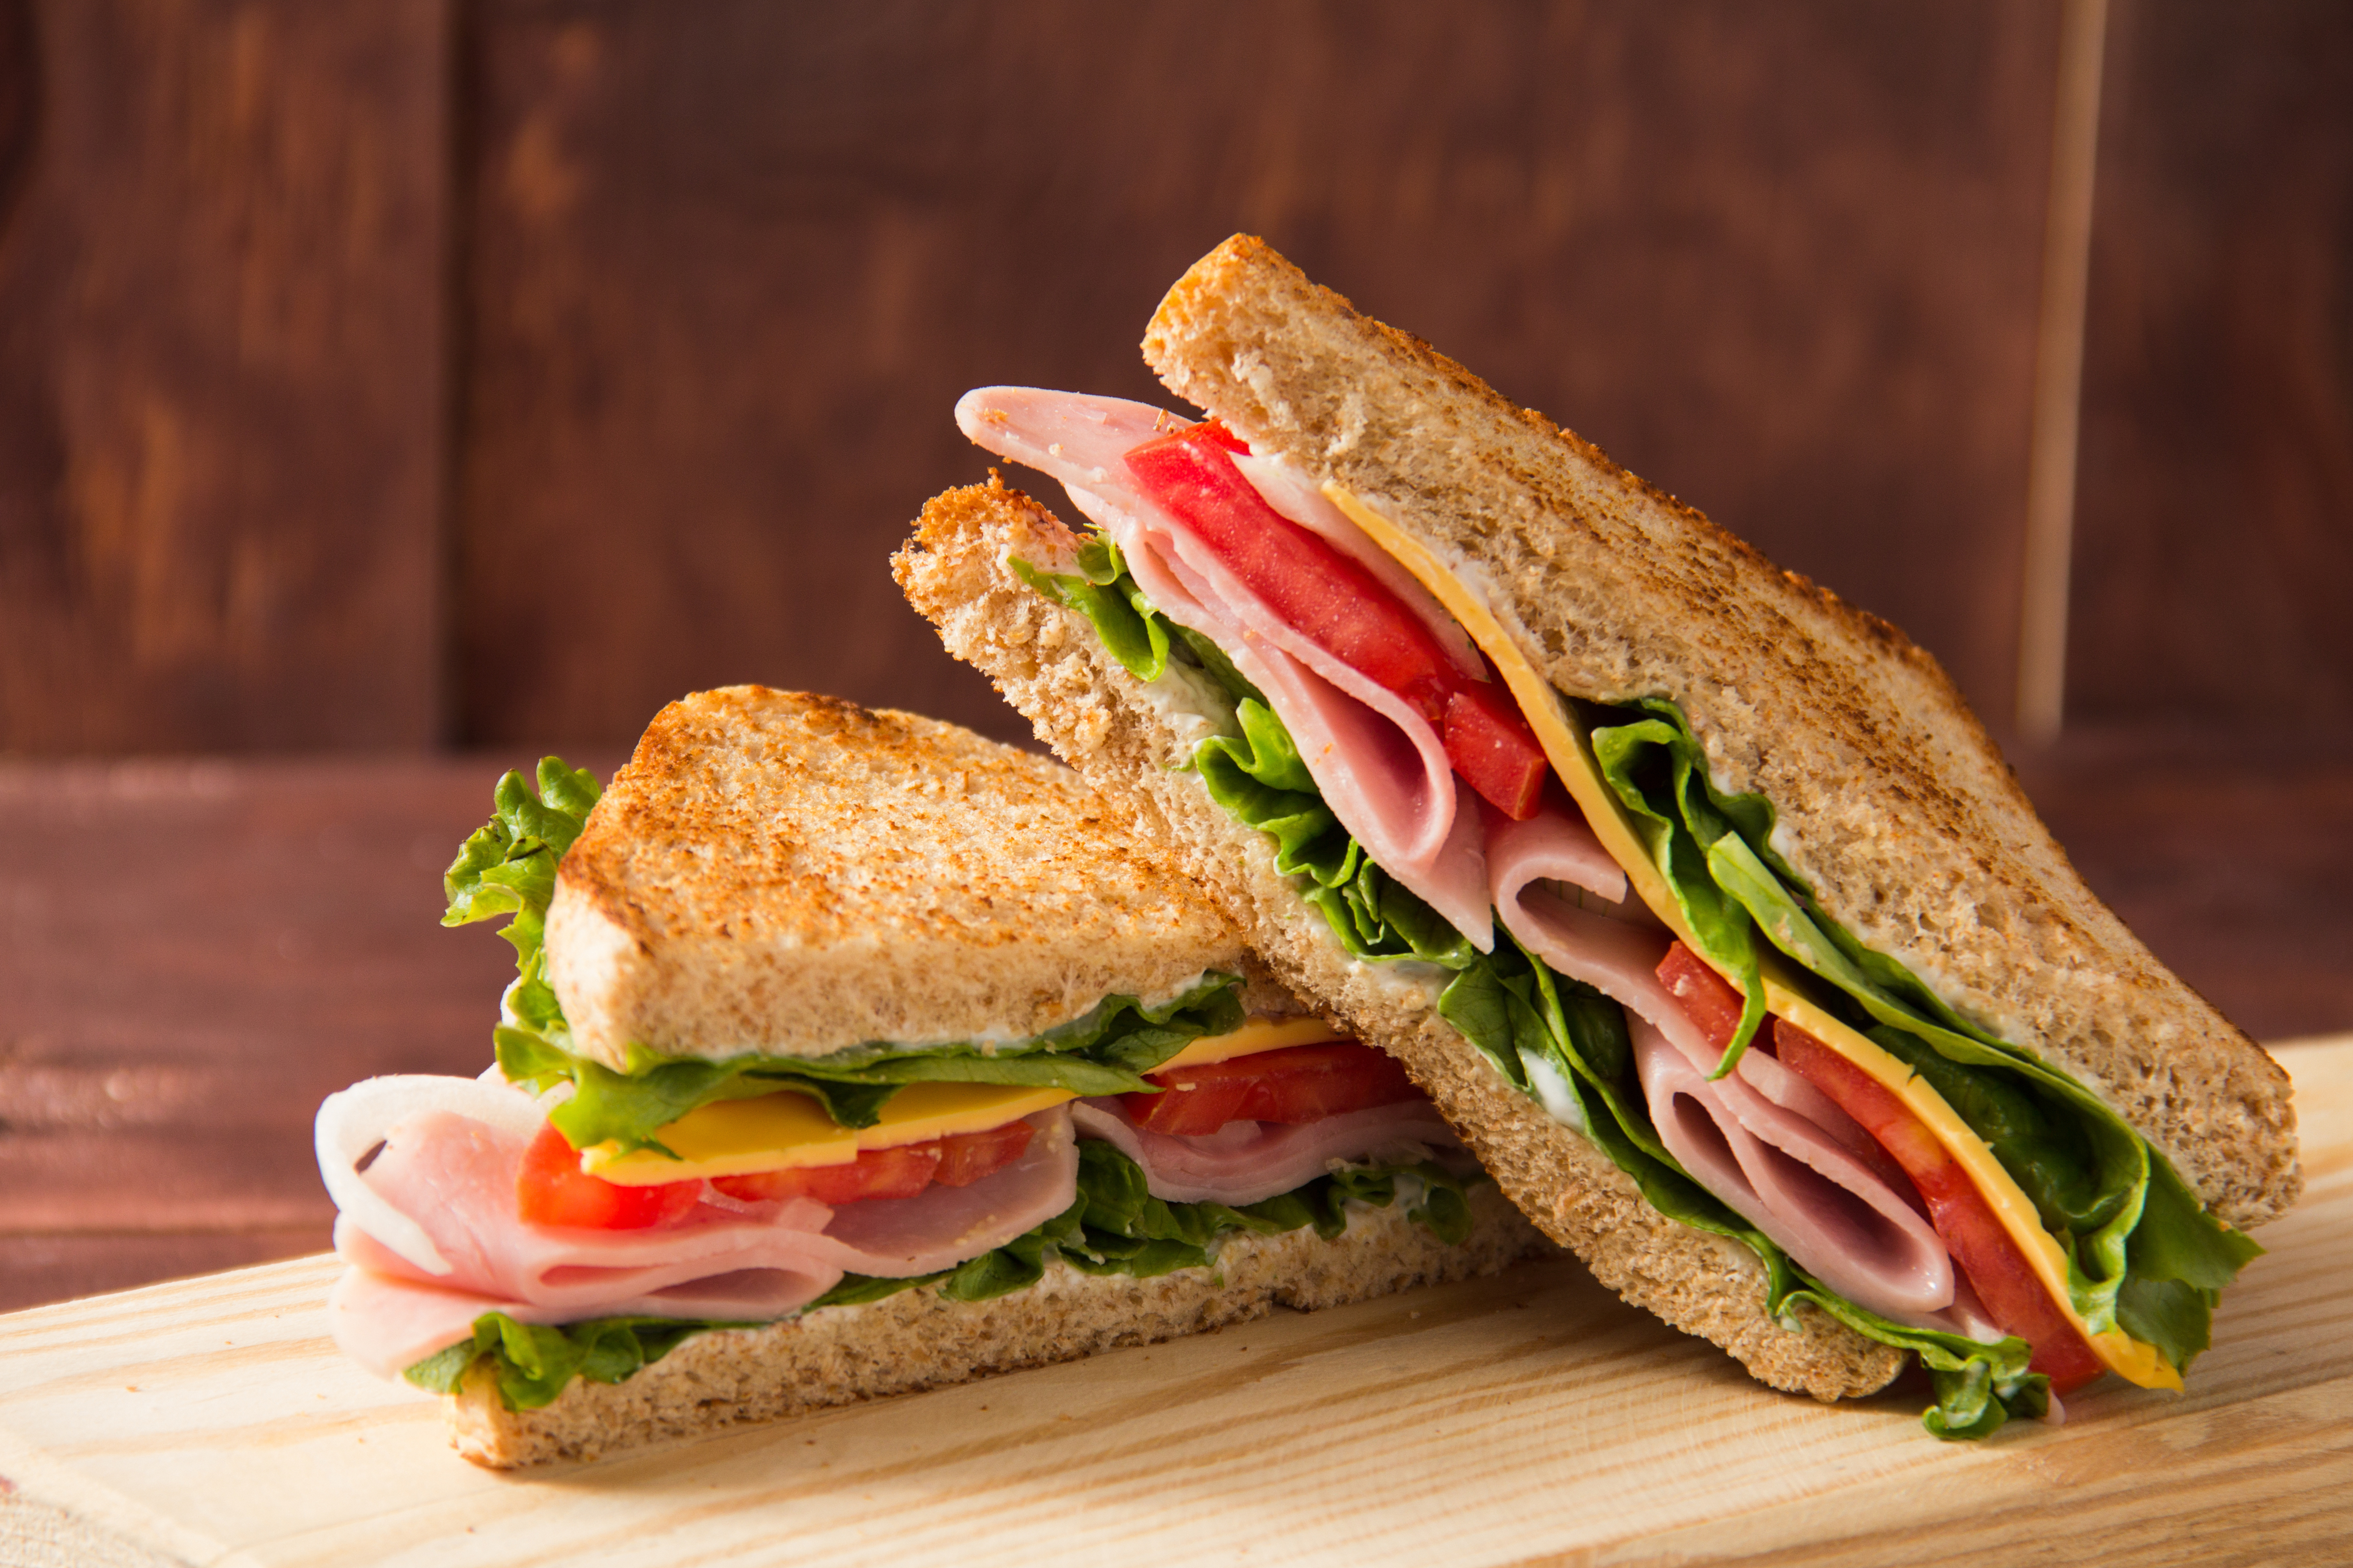 Ham and cheese sandwich with lettuce, tomato, and onions on a wooden surface